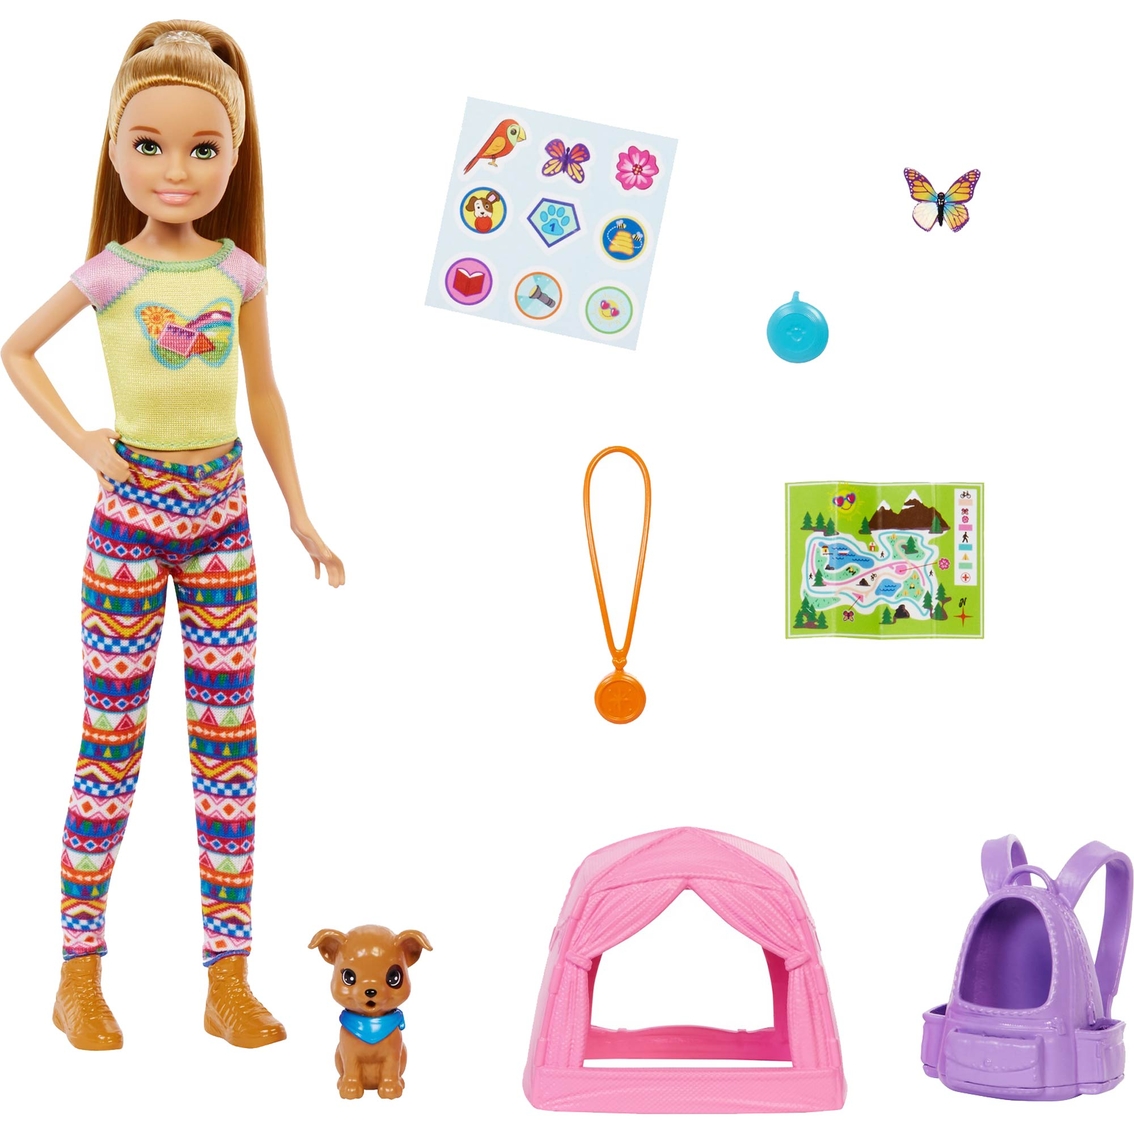 Barbie Camping Stacie Doll And Pet Playset, Dolls, Baby & Toys